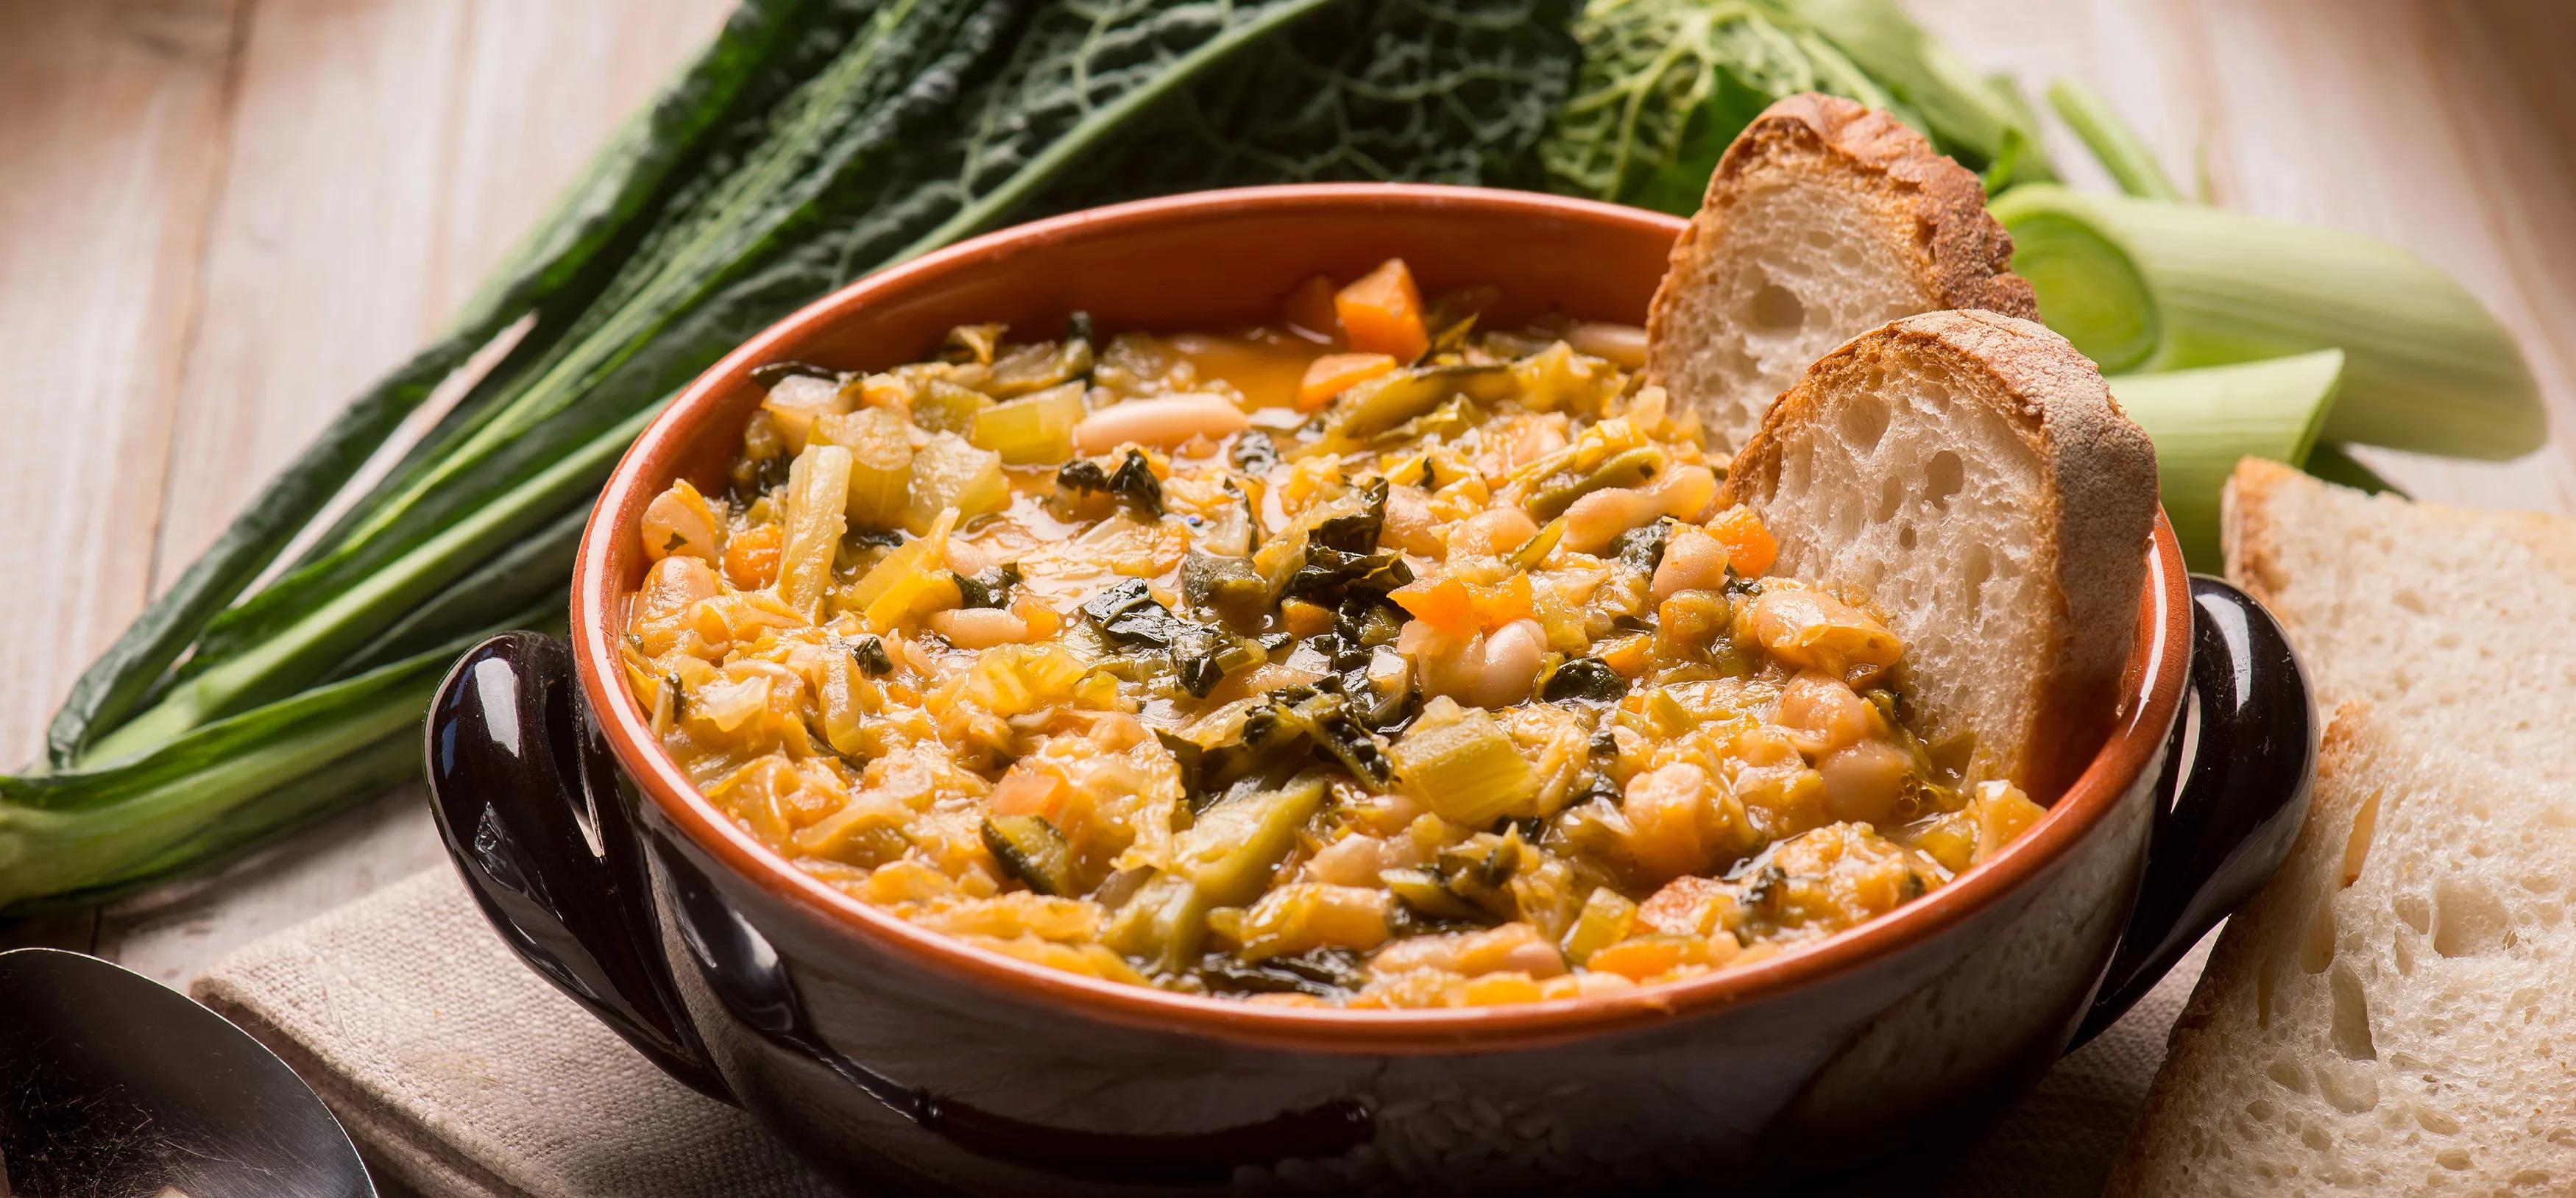 Ribollita | Traditional Vegetable Soup From Tuscany, Italy